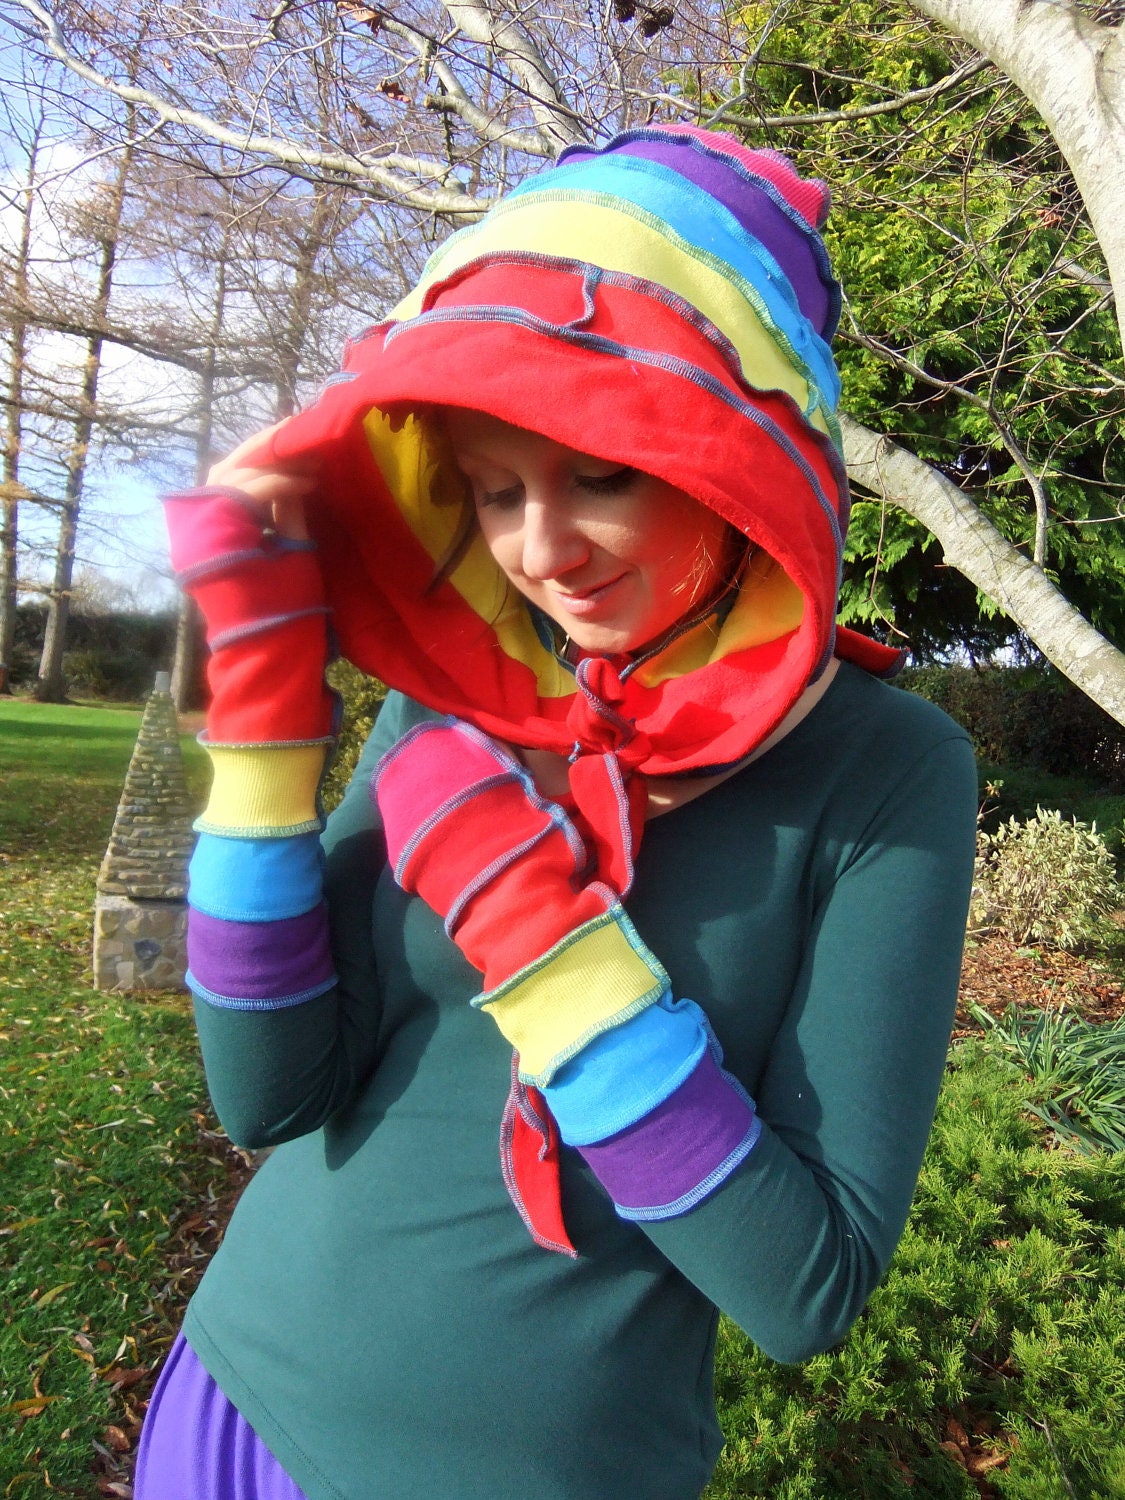 Rainbow Cotton Scoodie and Arm warmers - One of a Kind - Ready to Ship